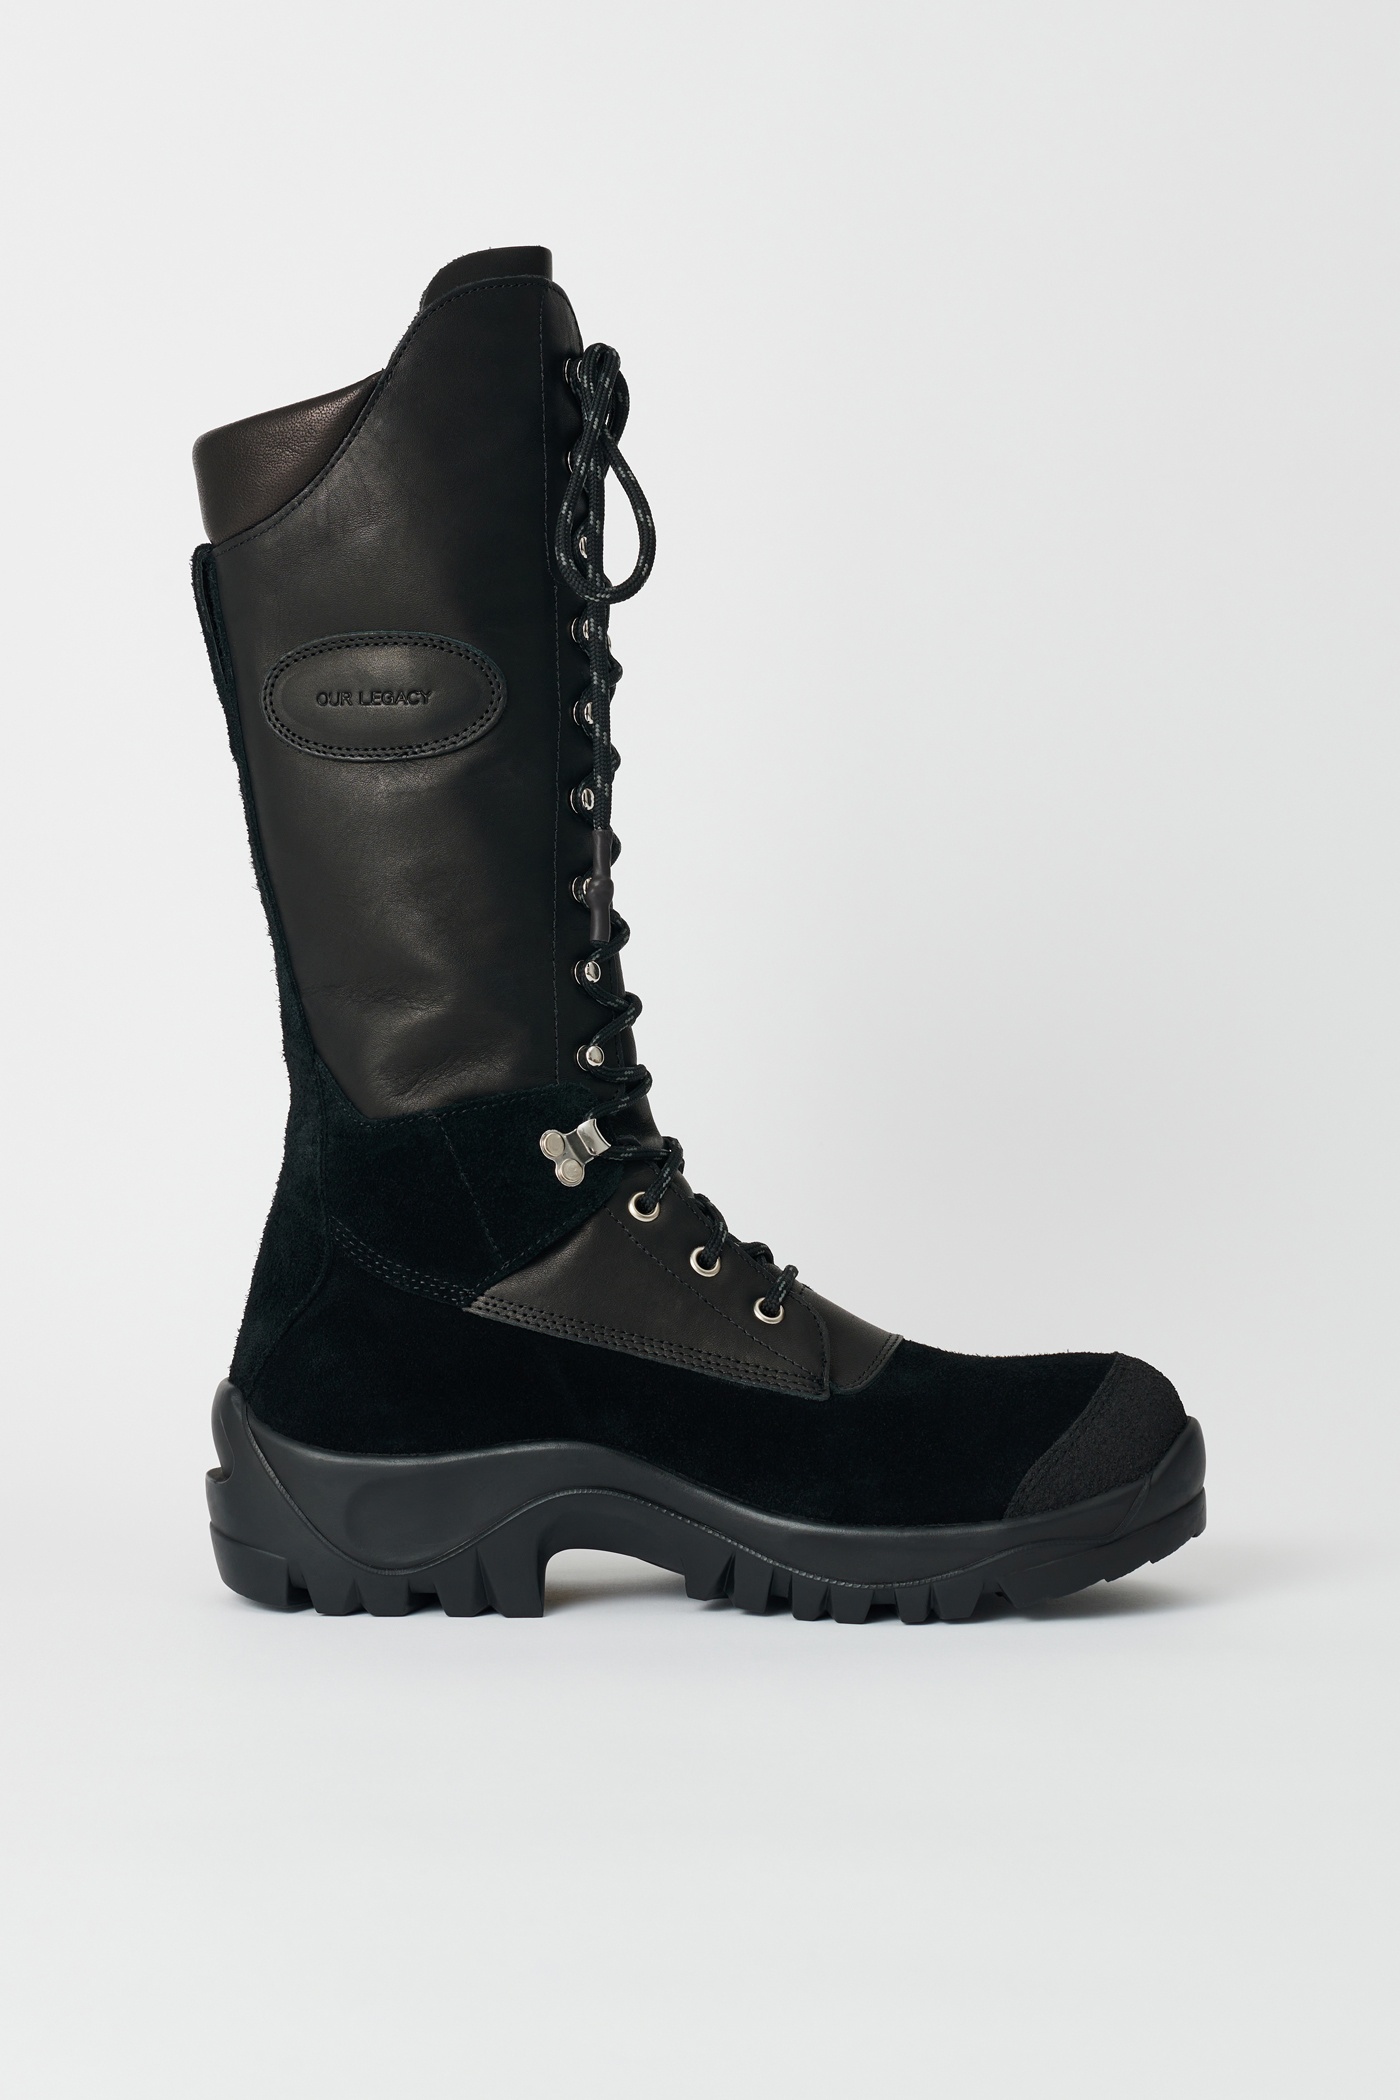 Tower Hiker Boot Black Leather - 5